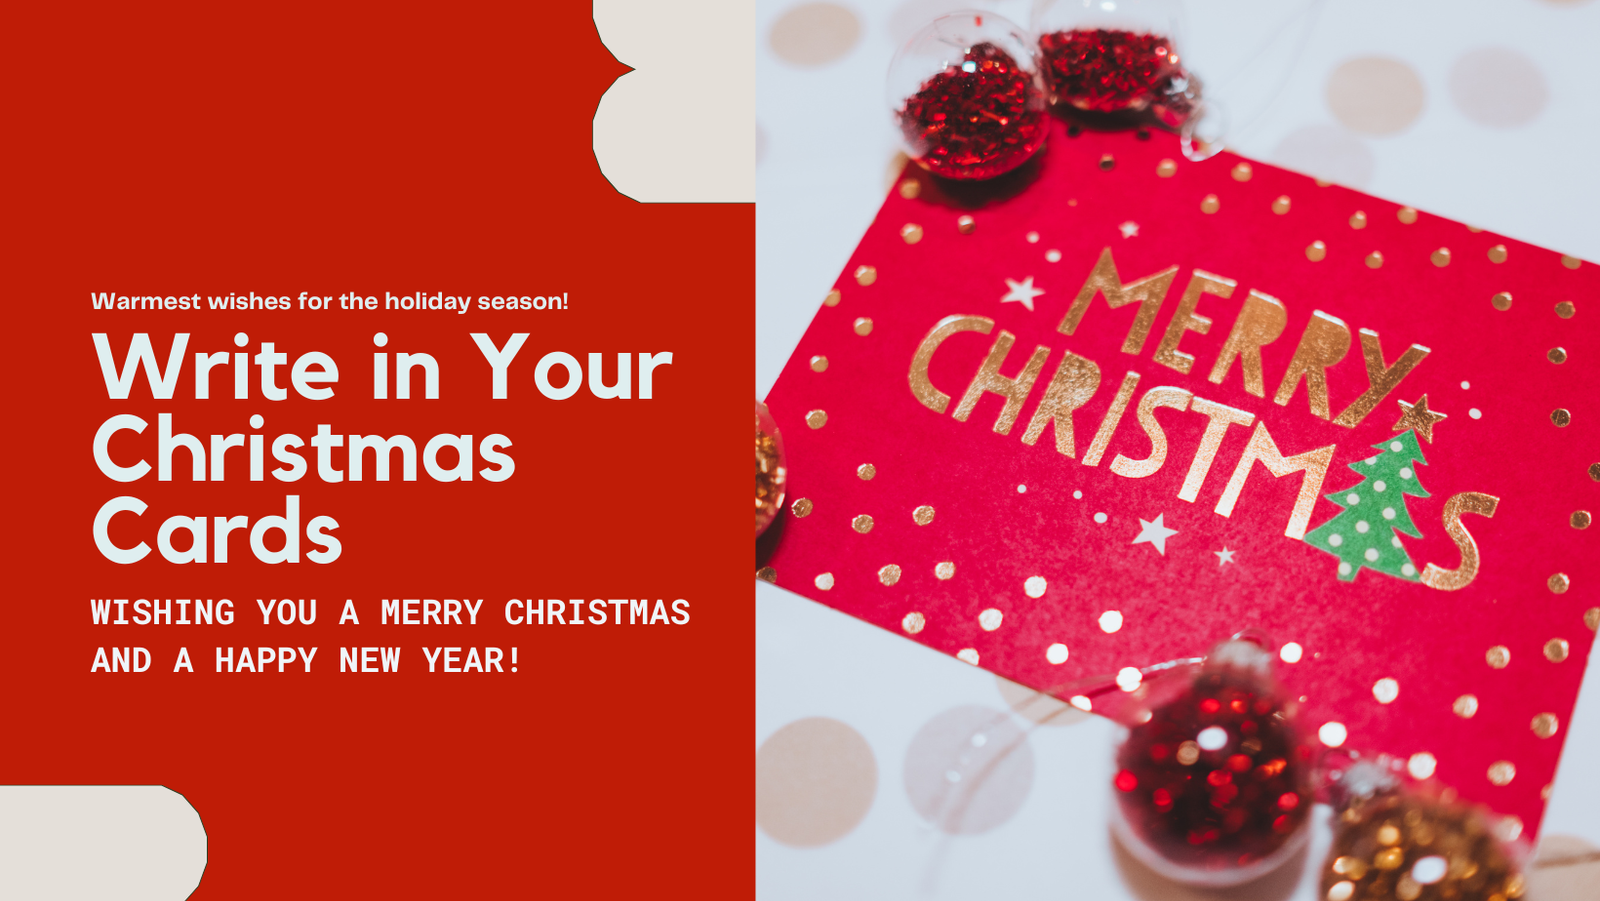 15 Heartfelt Merry Christmas Wishes to Write in Your Christmas Cards